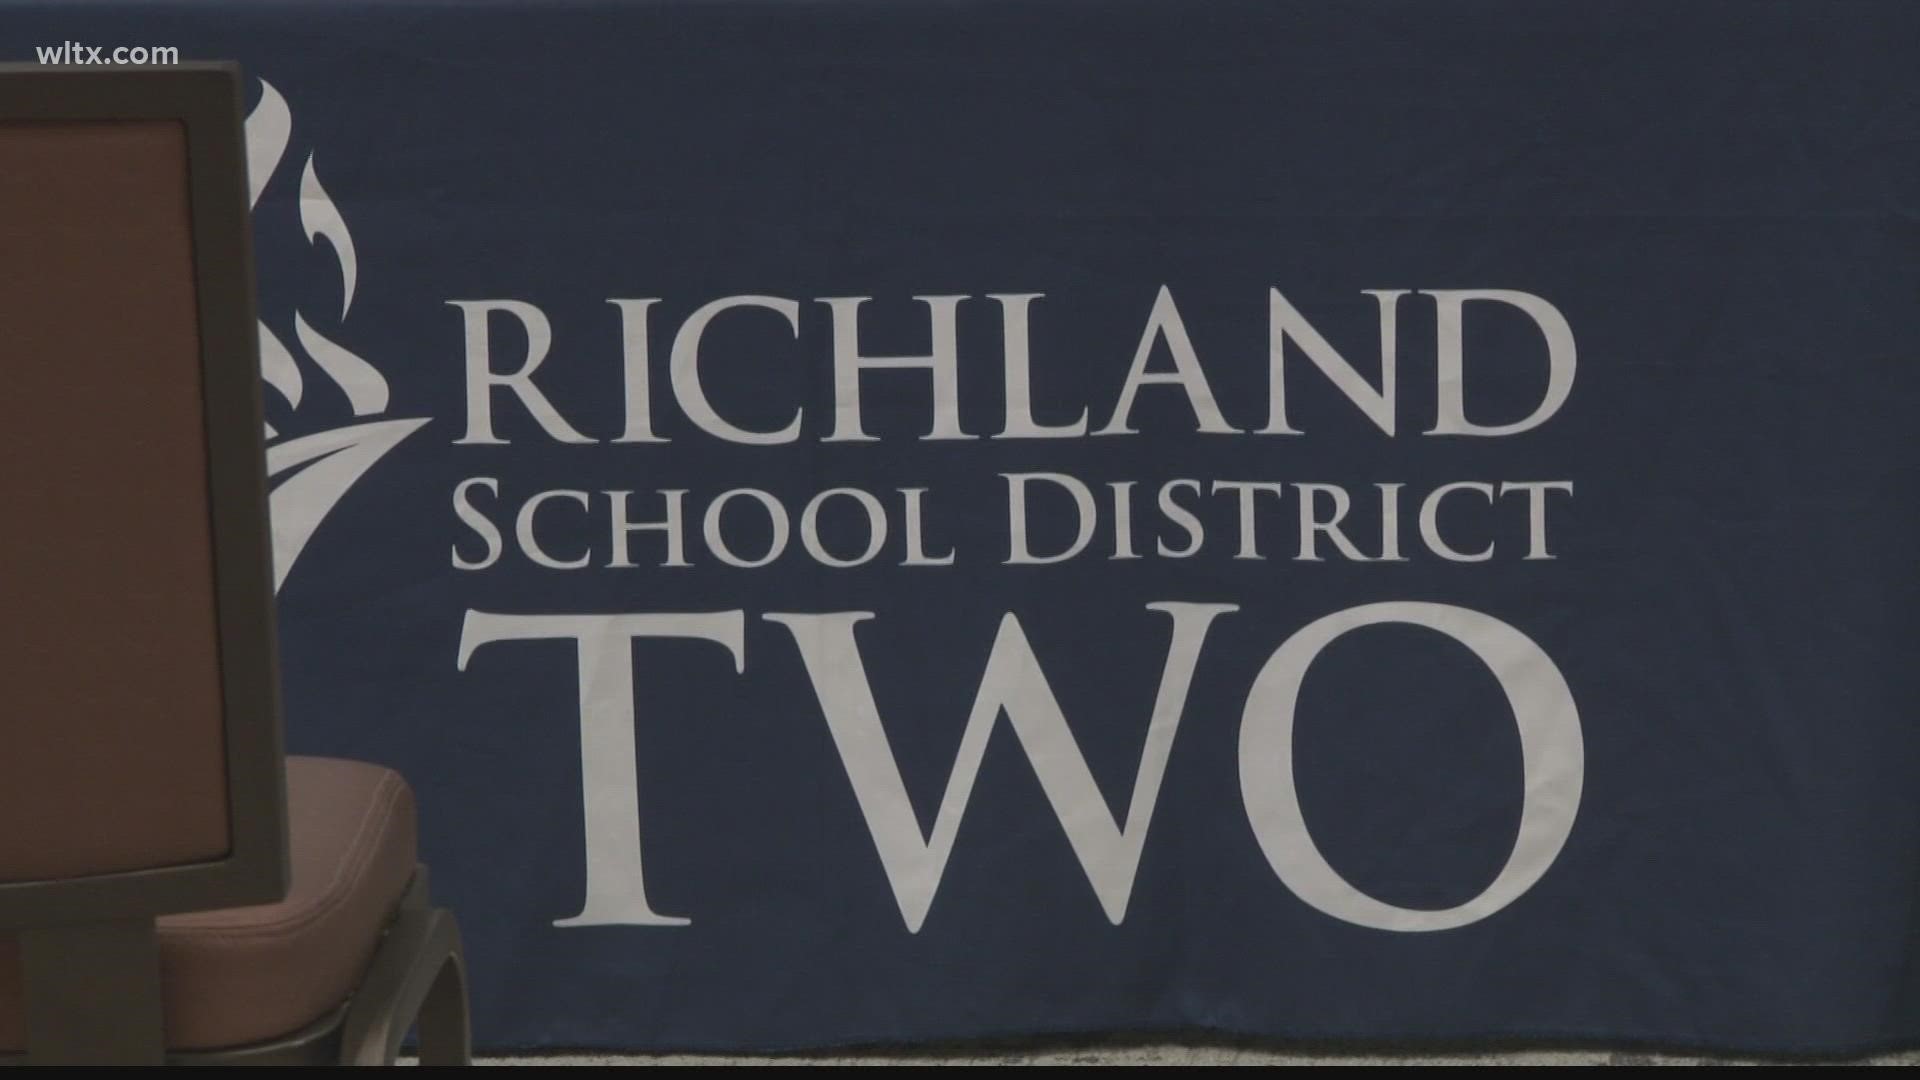 Richland School District Two has partnered with the City of Columbia to offer paid internships to students ages 16 through 18.